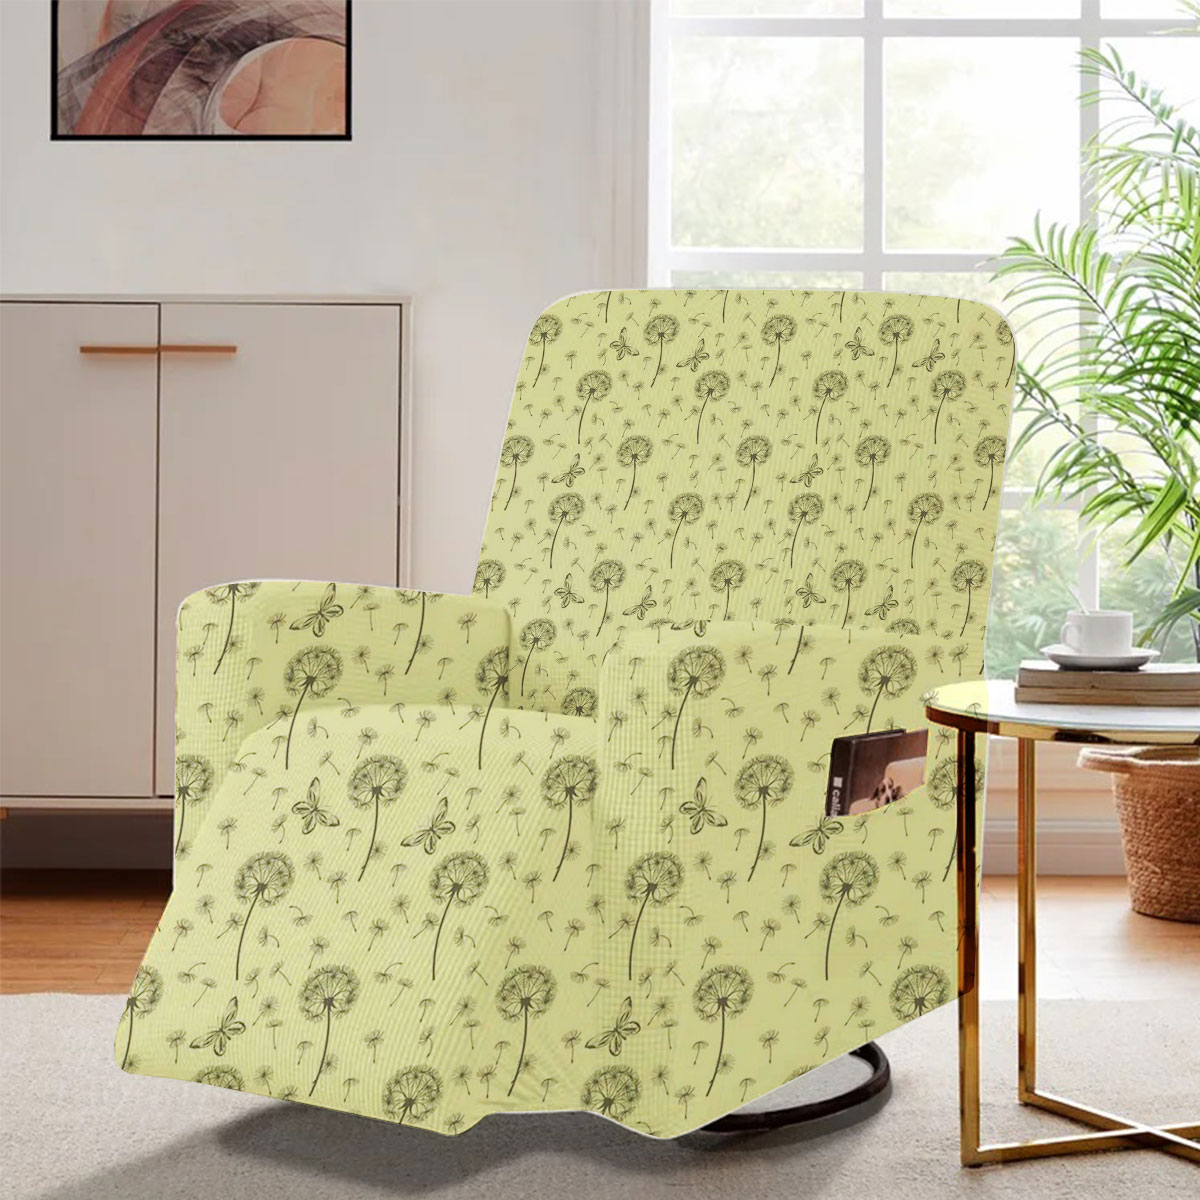 Dandelions And Butterflies On Yellow Background Recliner Slipcover